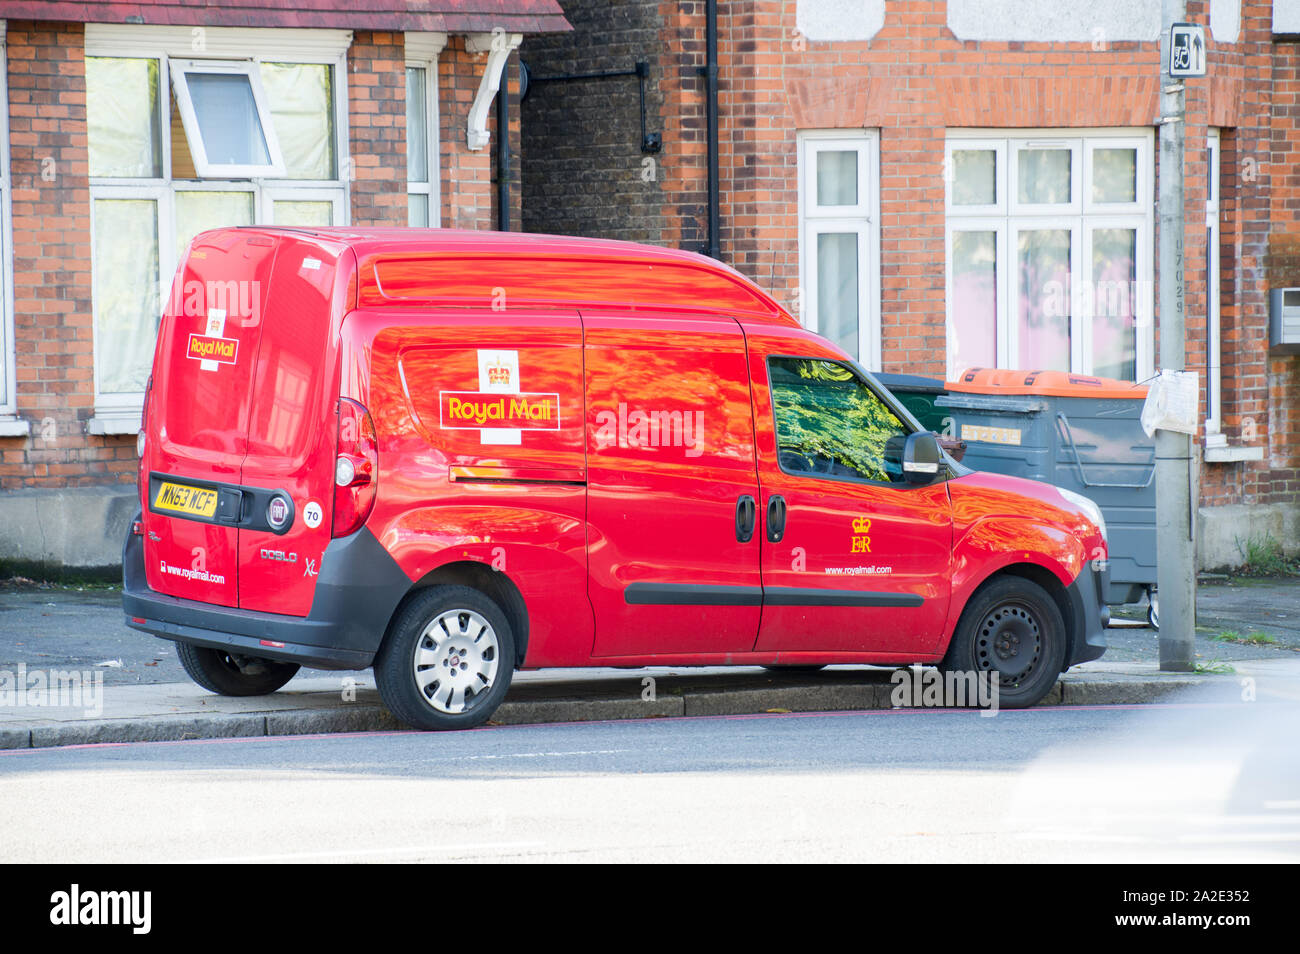 Royal mail red fiat doblo van parked in a residential area on platform Stock Photo